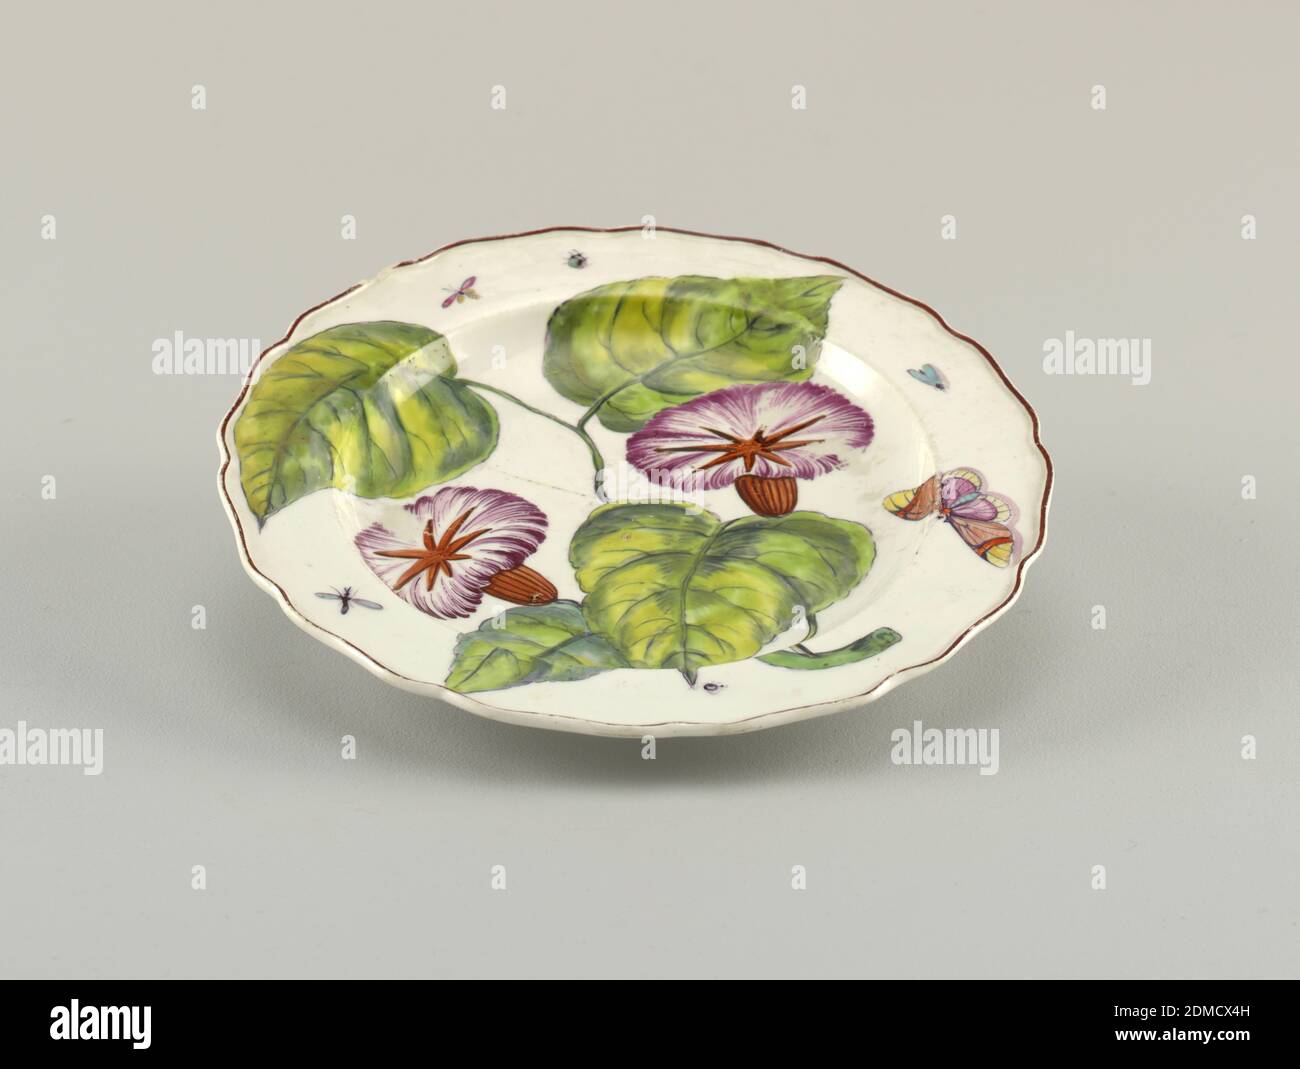 Hans Sloane' Plate, Chelsea Porcelain Manufactory, English, established ca. 1743/45, Georg Dionysius Ehret, German, 1708 - 1770, soft paste porcelain, vitreous enamel, A plate with a wavy, brown-edged rim, painted with a large branch of convolvulus/bindweed (Ipomoea purpurea) and various insects., England, 1753–1756, ceramics, Decorative Arts, plate, plate Stock Photo